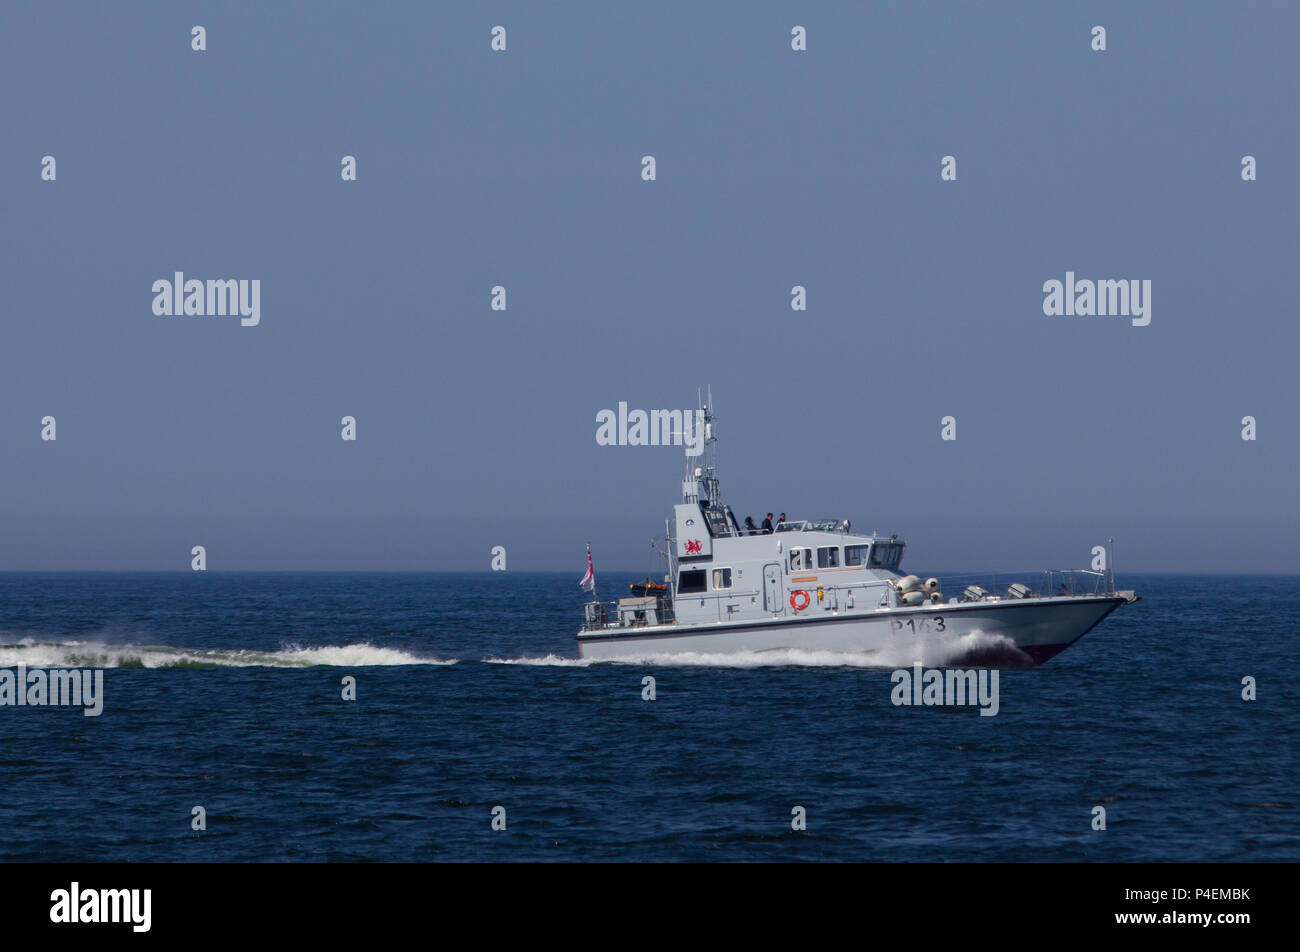 A Starboard side view of The Archer Class Patrol Vessel HMS Express P163, in transit in the North sea near the Baltic. Stock Photo